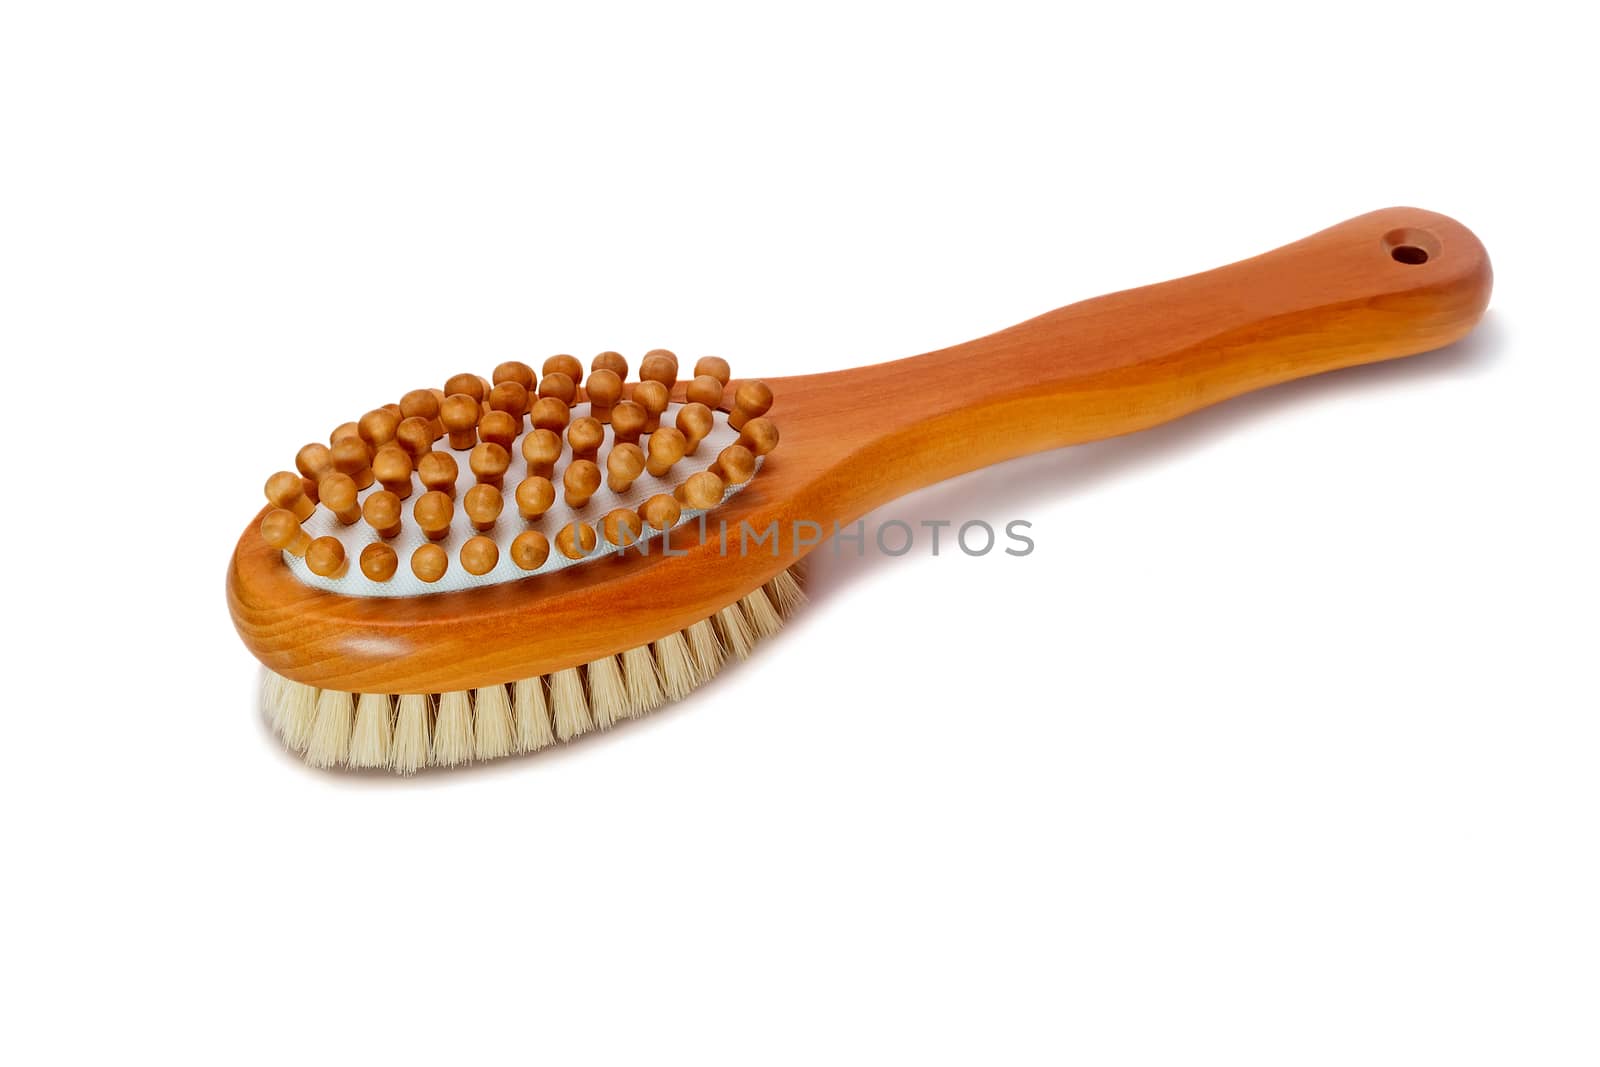 Wooden brush with wooden beads and bristles to massage the body . Presented on a white background.